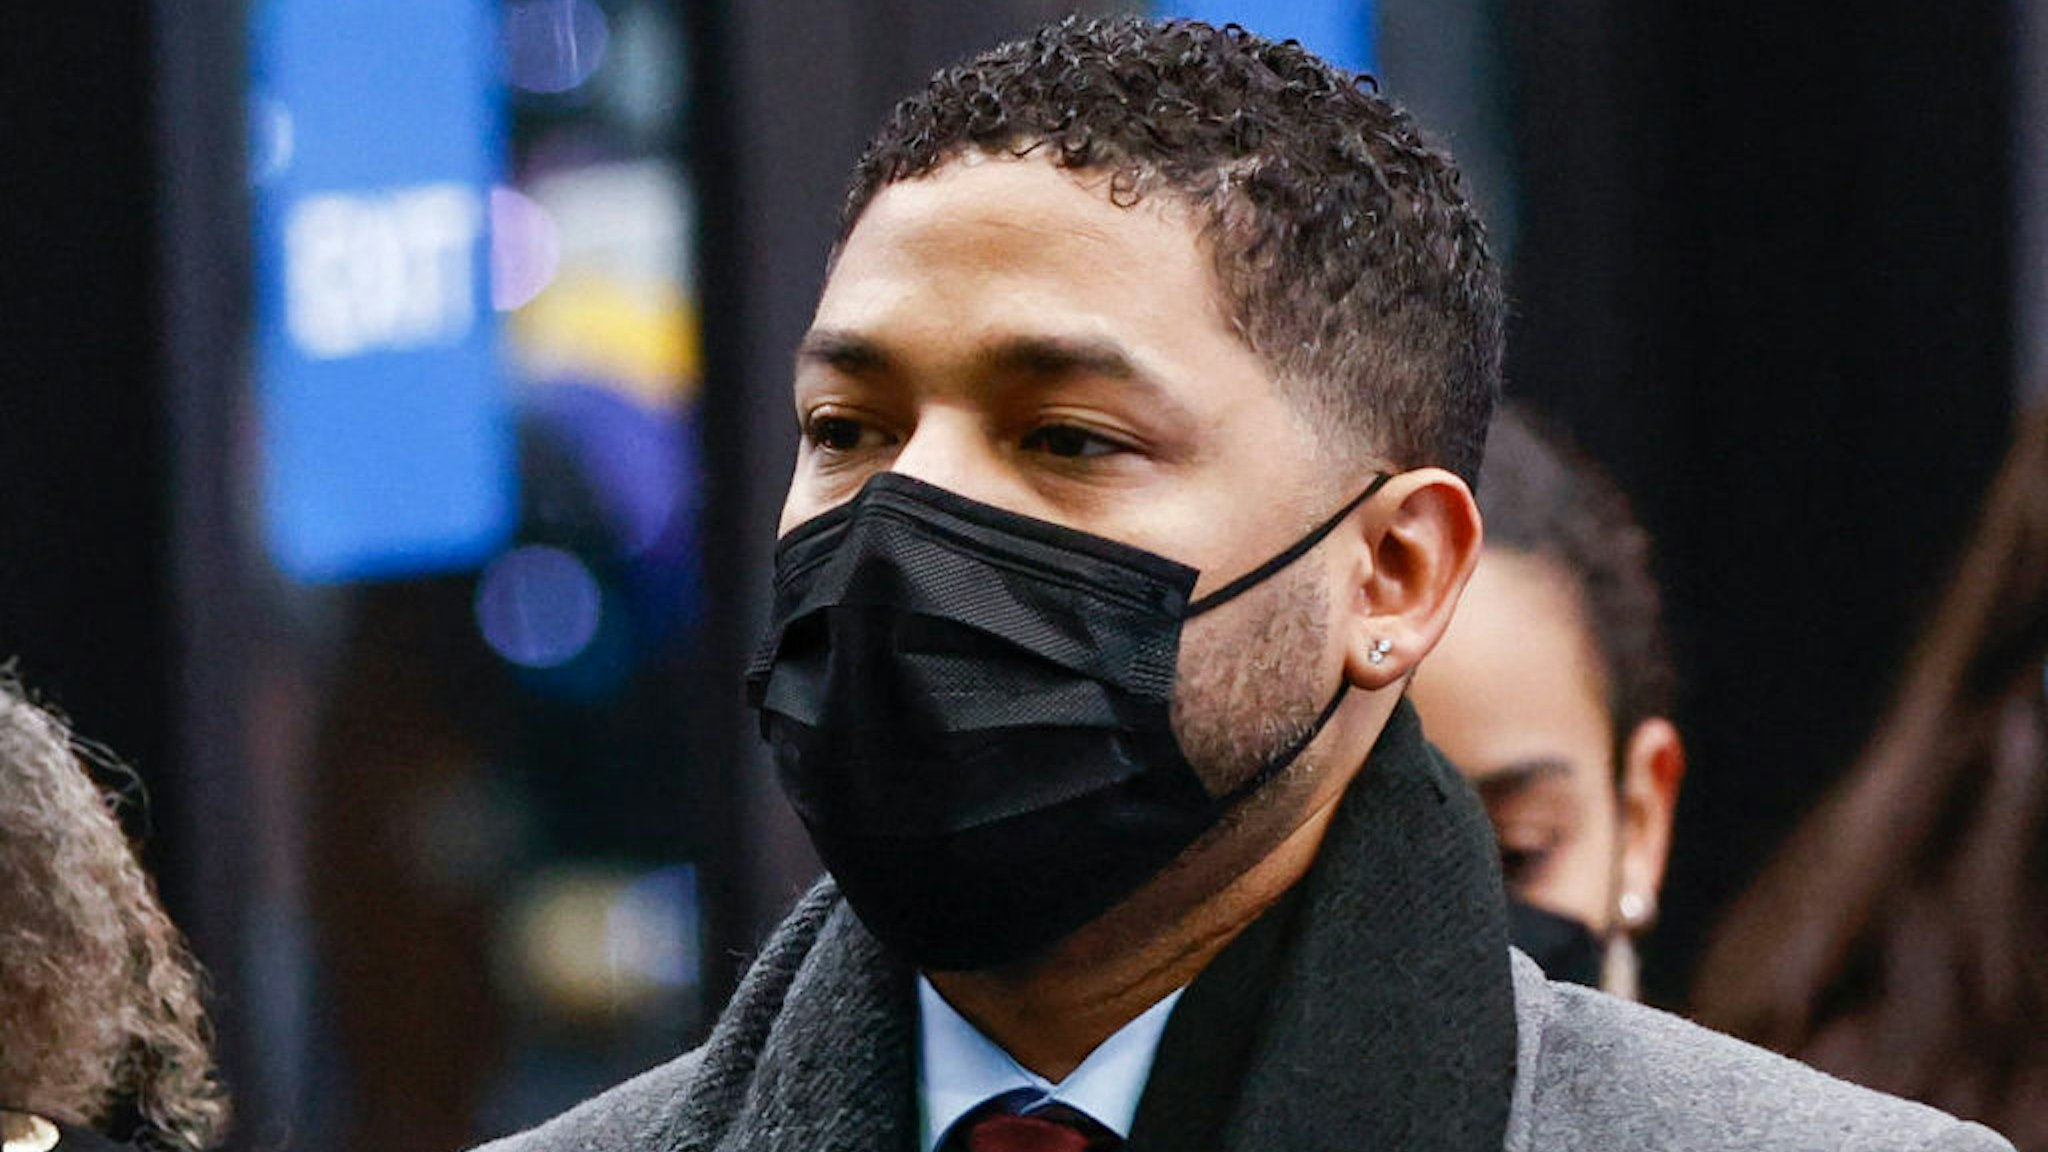 Jussie Smollett arrives with family members at the Leighton Criminal Court Building for his trial on disorderly conduct charges on December 6 2021 in Chicago, Illinois. - Former "Empire" star Jussie Smollett is accused of making false reports to authorities that he was the victim of a racist and homophobic attack in 2019. (Photo by KAMIL KRZACZYNSKI / AFP) (Photo by KAMIL KRZACZYNSKI/AFP via Getty Images)